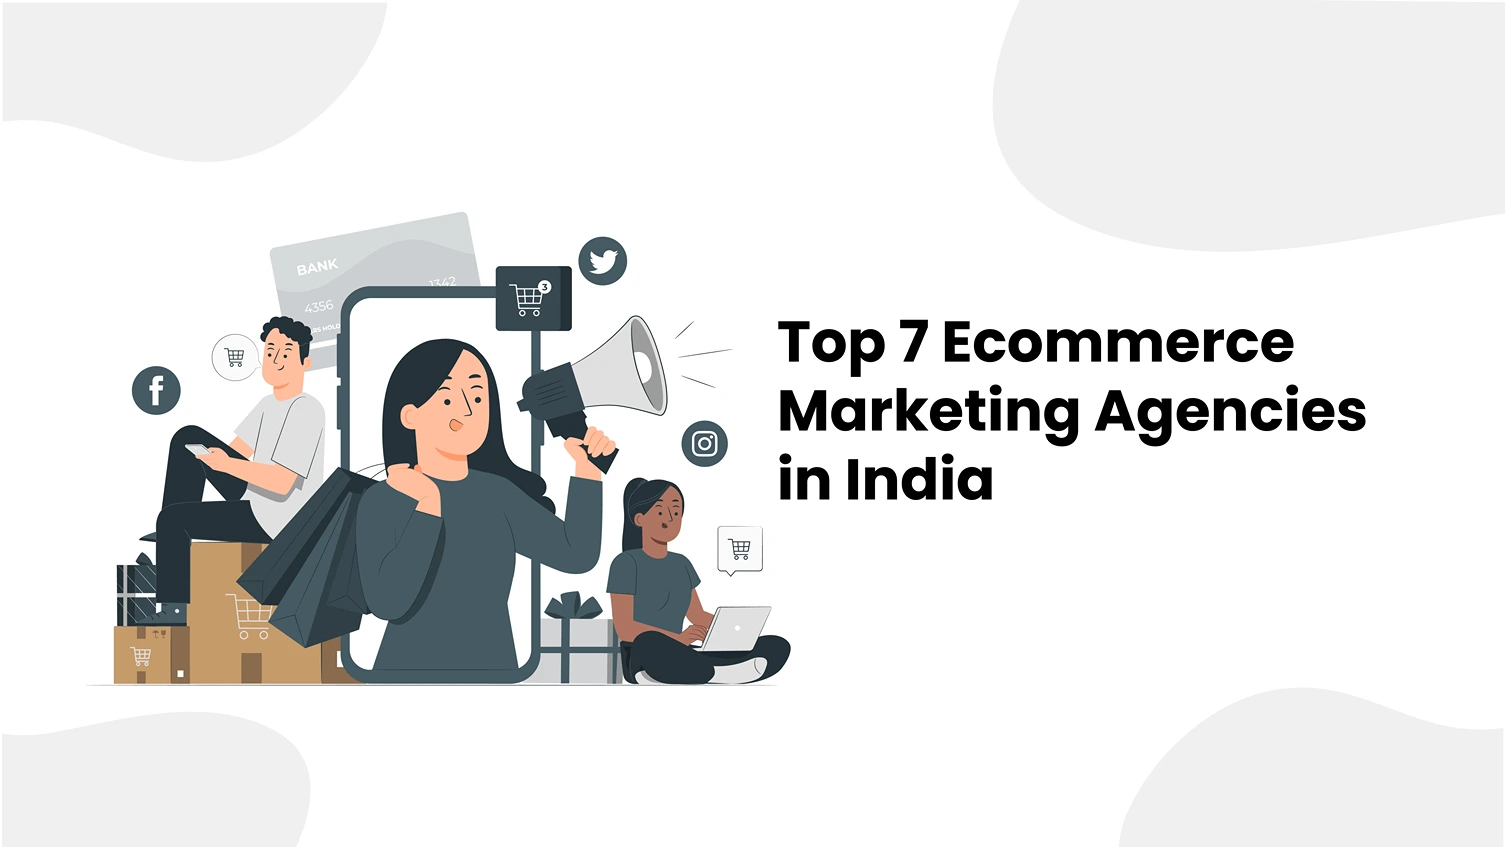 Top 7 Ecommerce Marketing Agencies in India